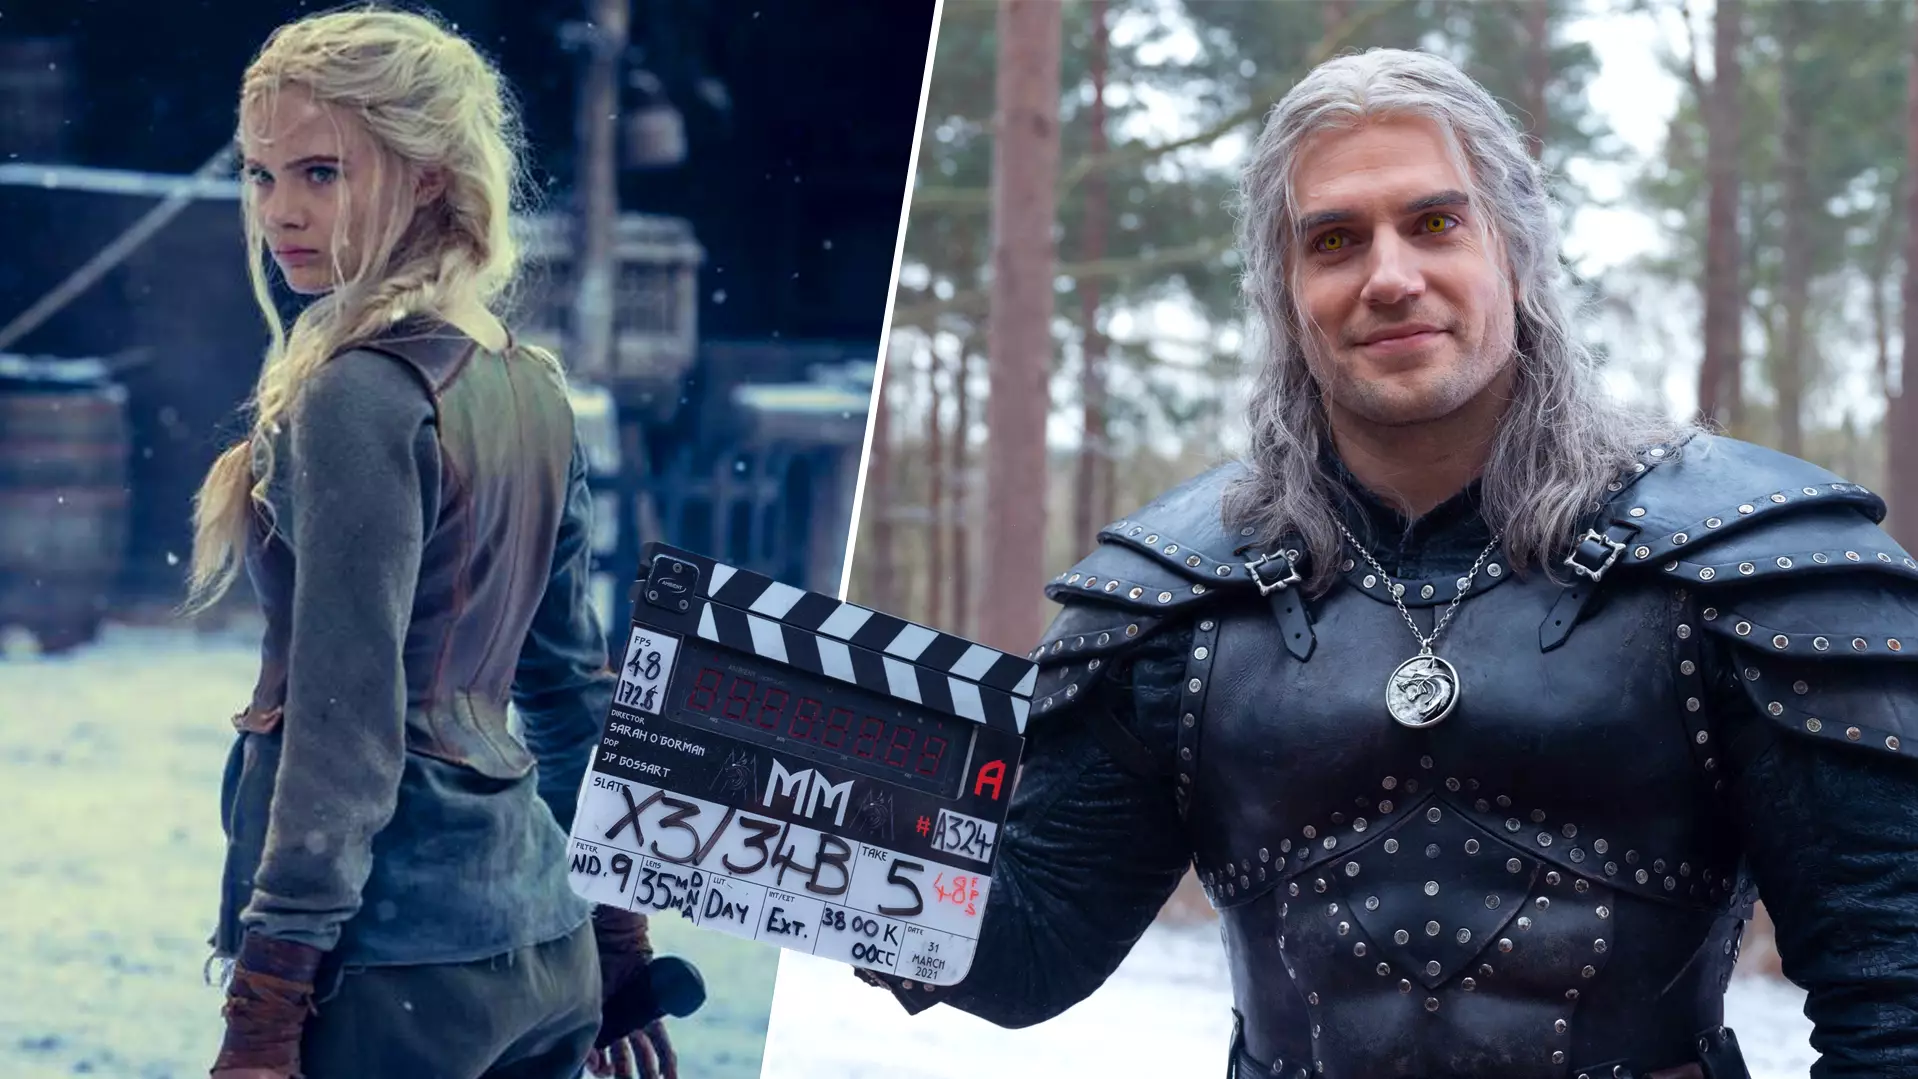 Netflix’s First Proper Showing Of ‘The Witcher’ Season 2 Coming Next Week